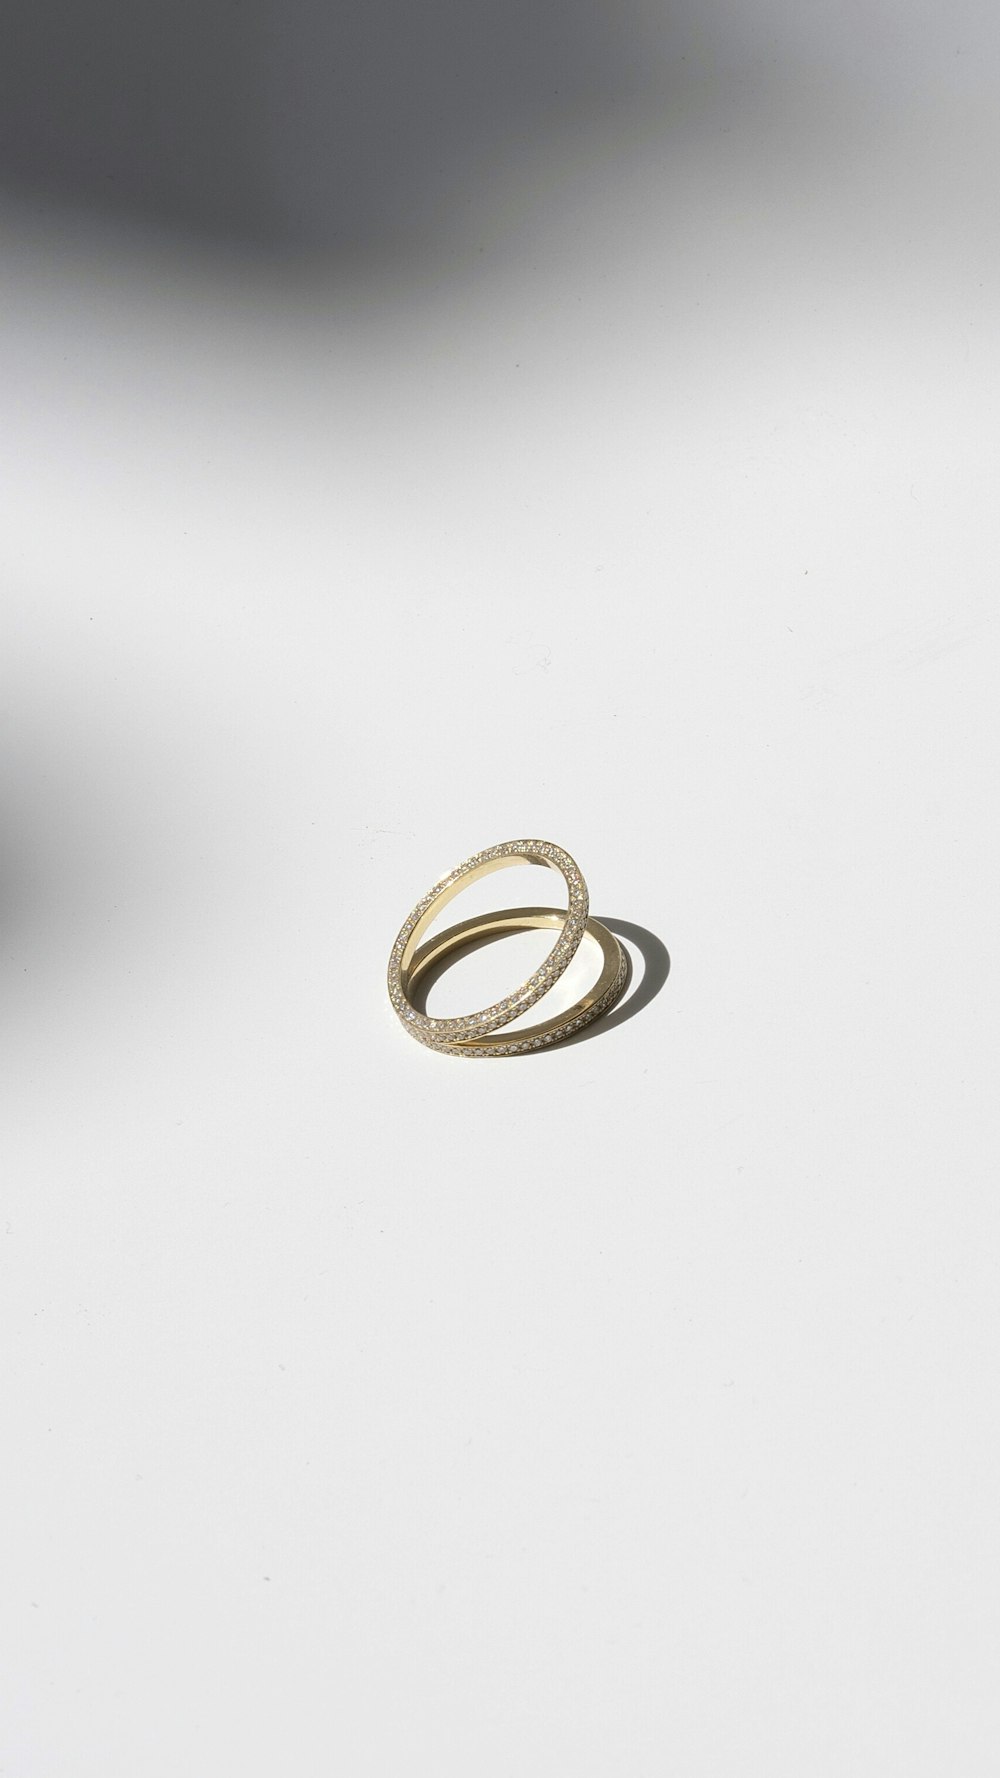 gold ring on white surface